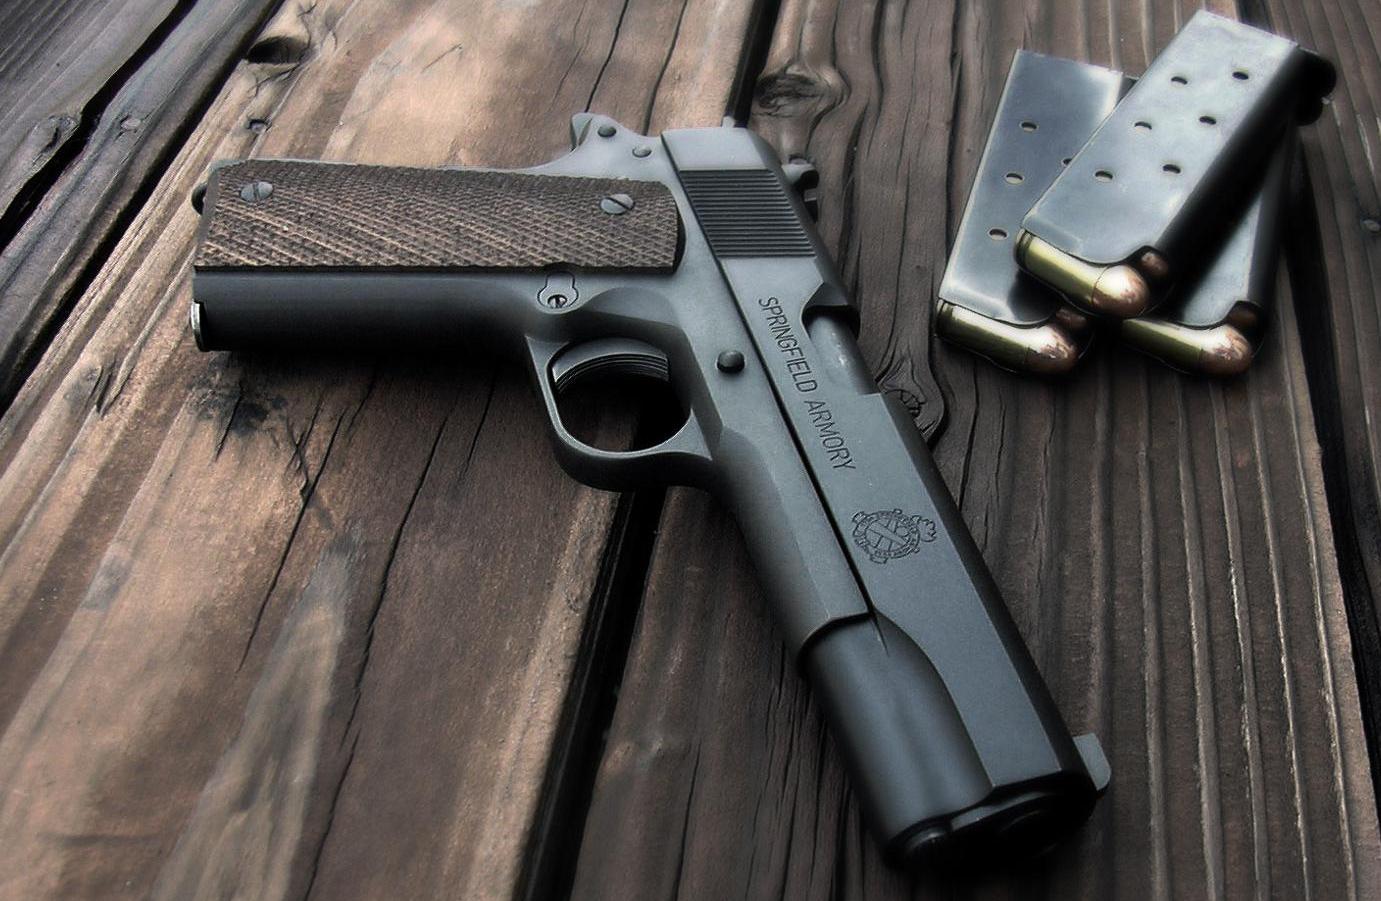 weapons, springfield armory 1911 pistol